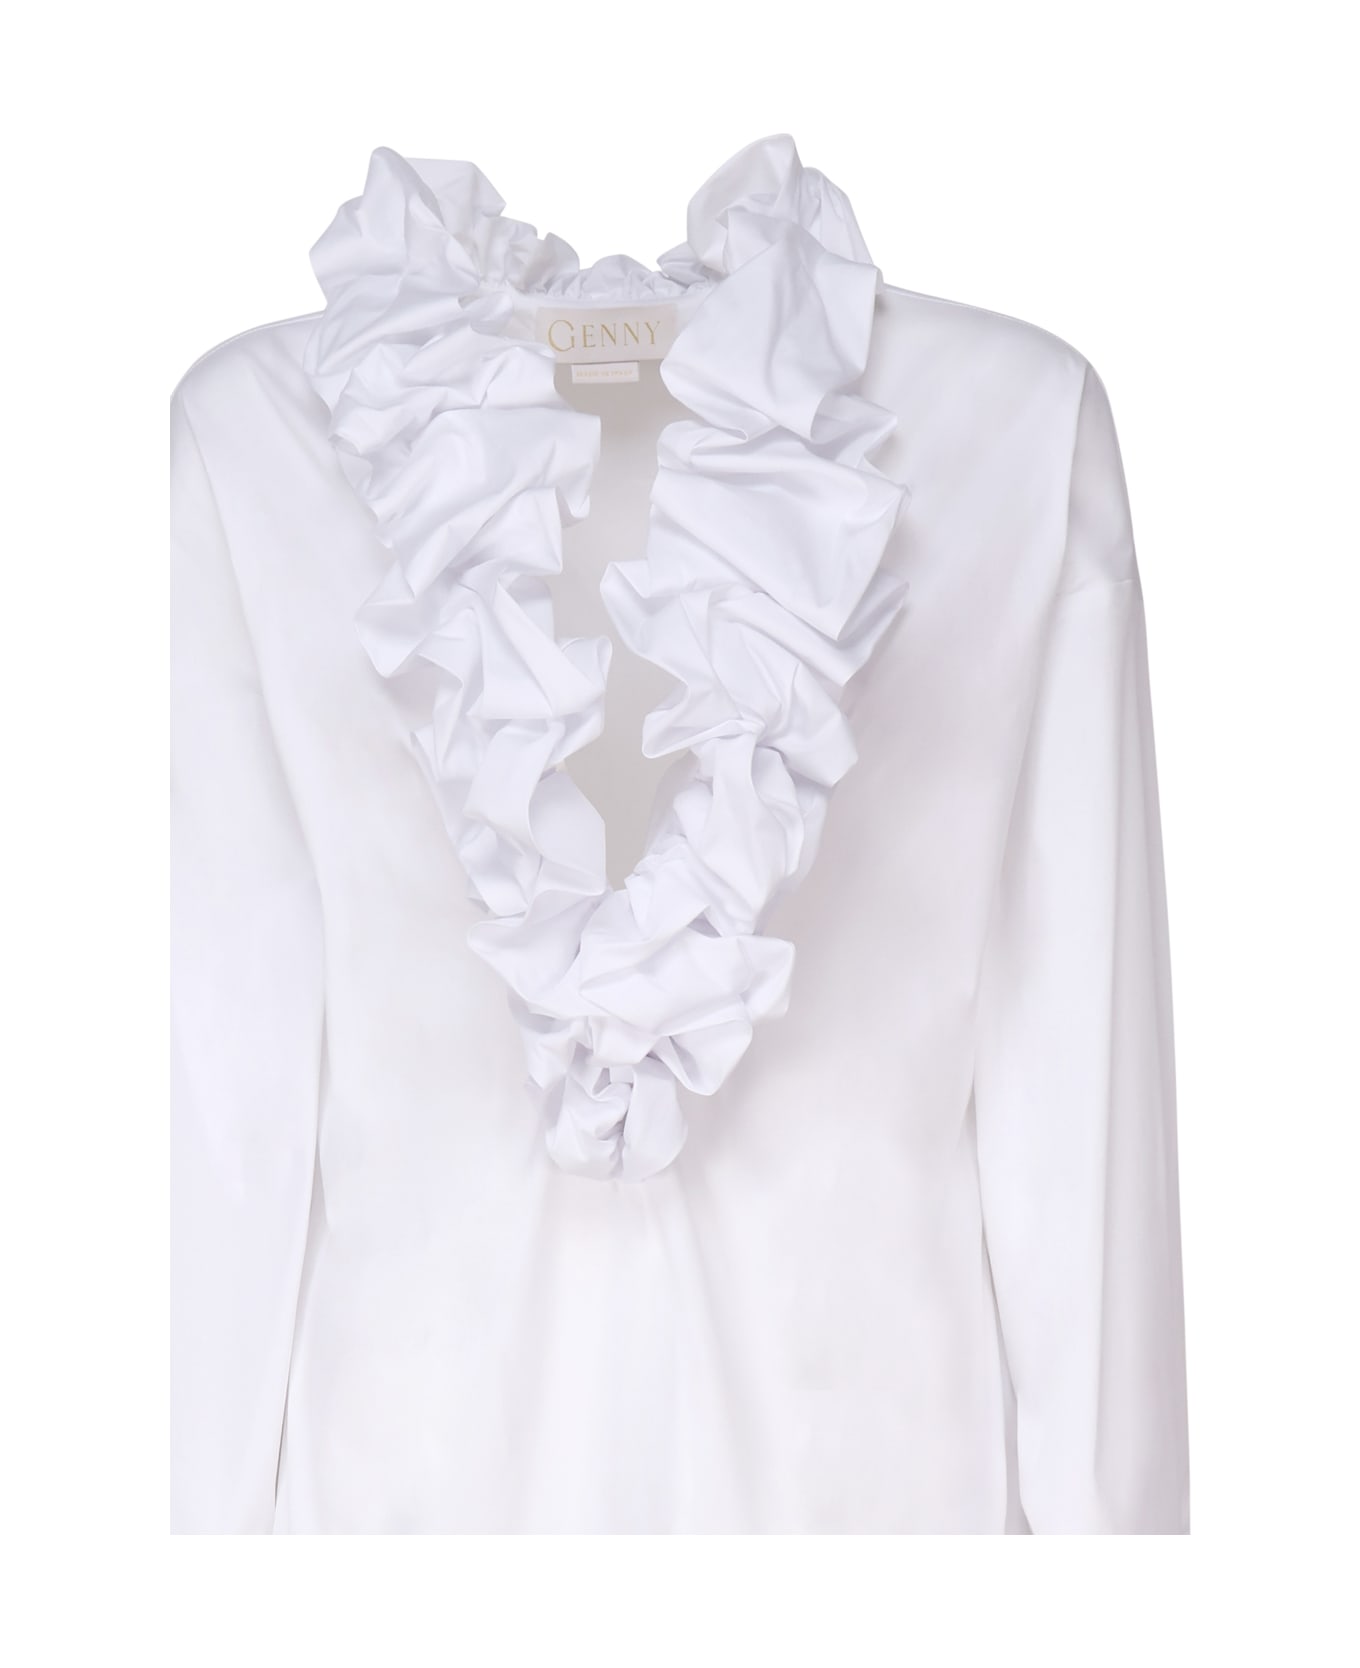 Genny Blouse With Ruffles - White